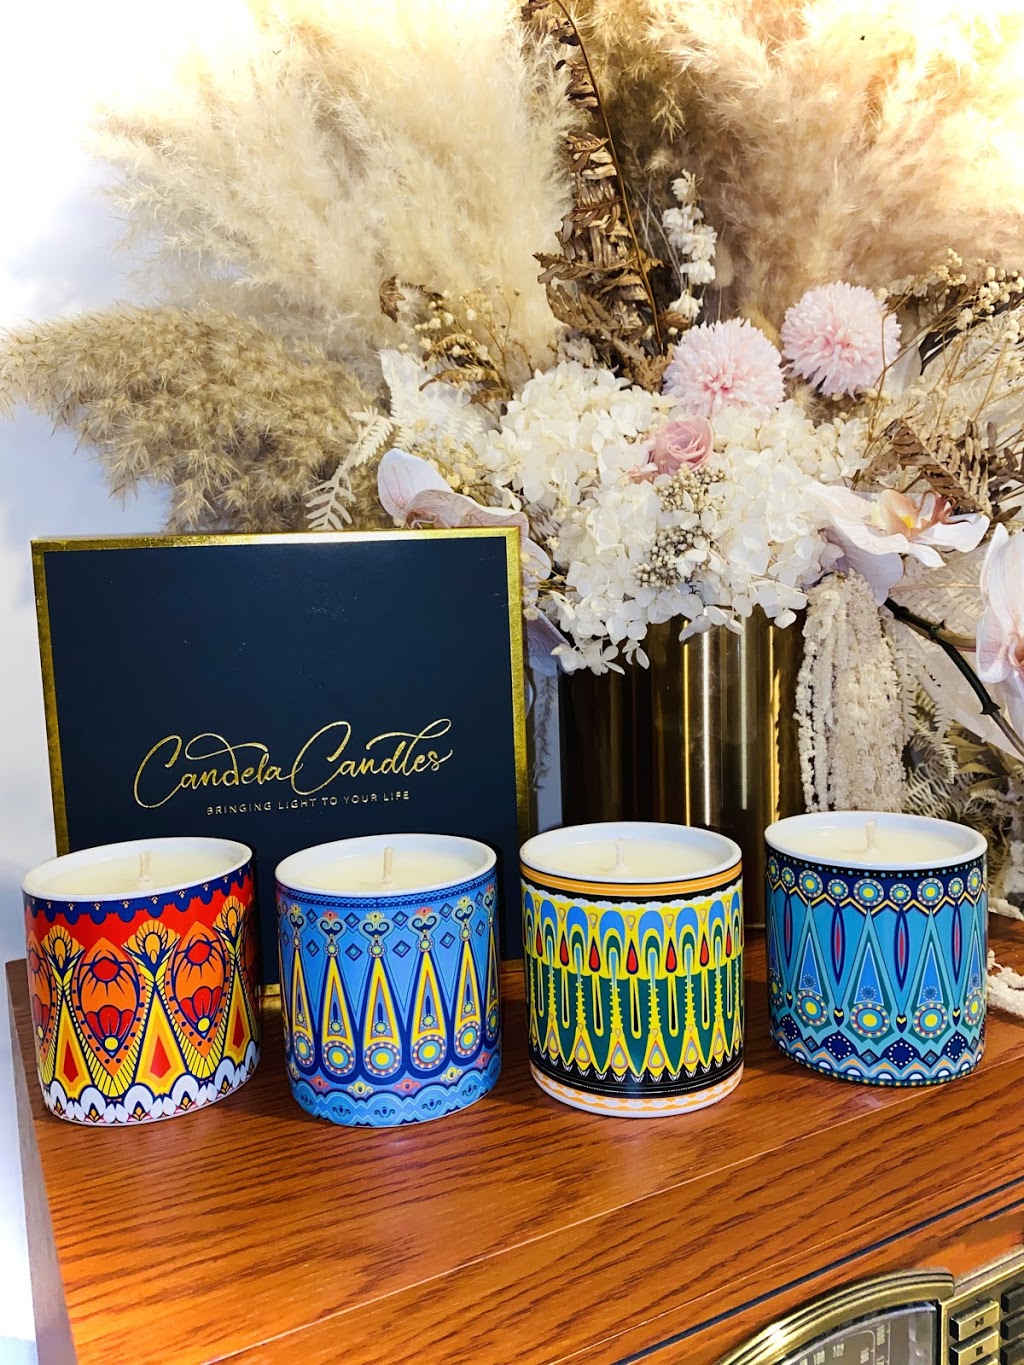 Candela Candles | home goods store | 99 Clements St, Moranbah QLD 4744, Australia | 0477311455 OR +61 477 311 455